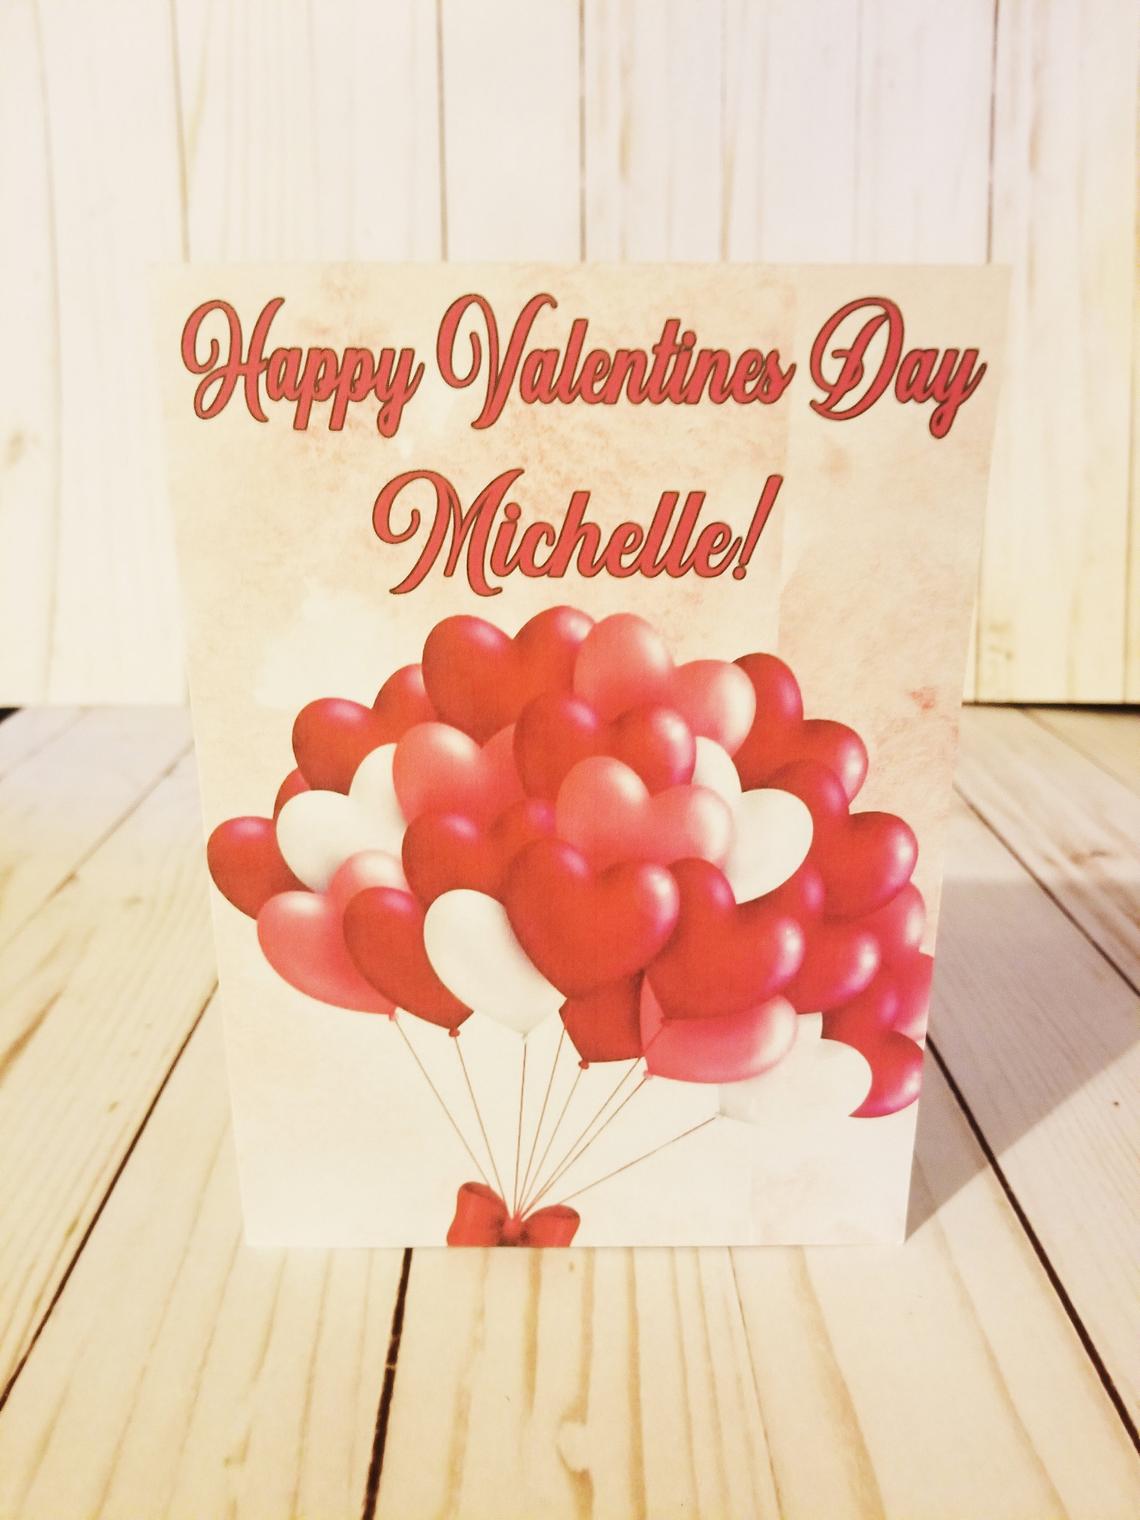 Personalised Valentine's Day Card Balloon Valentines Card